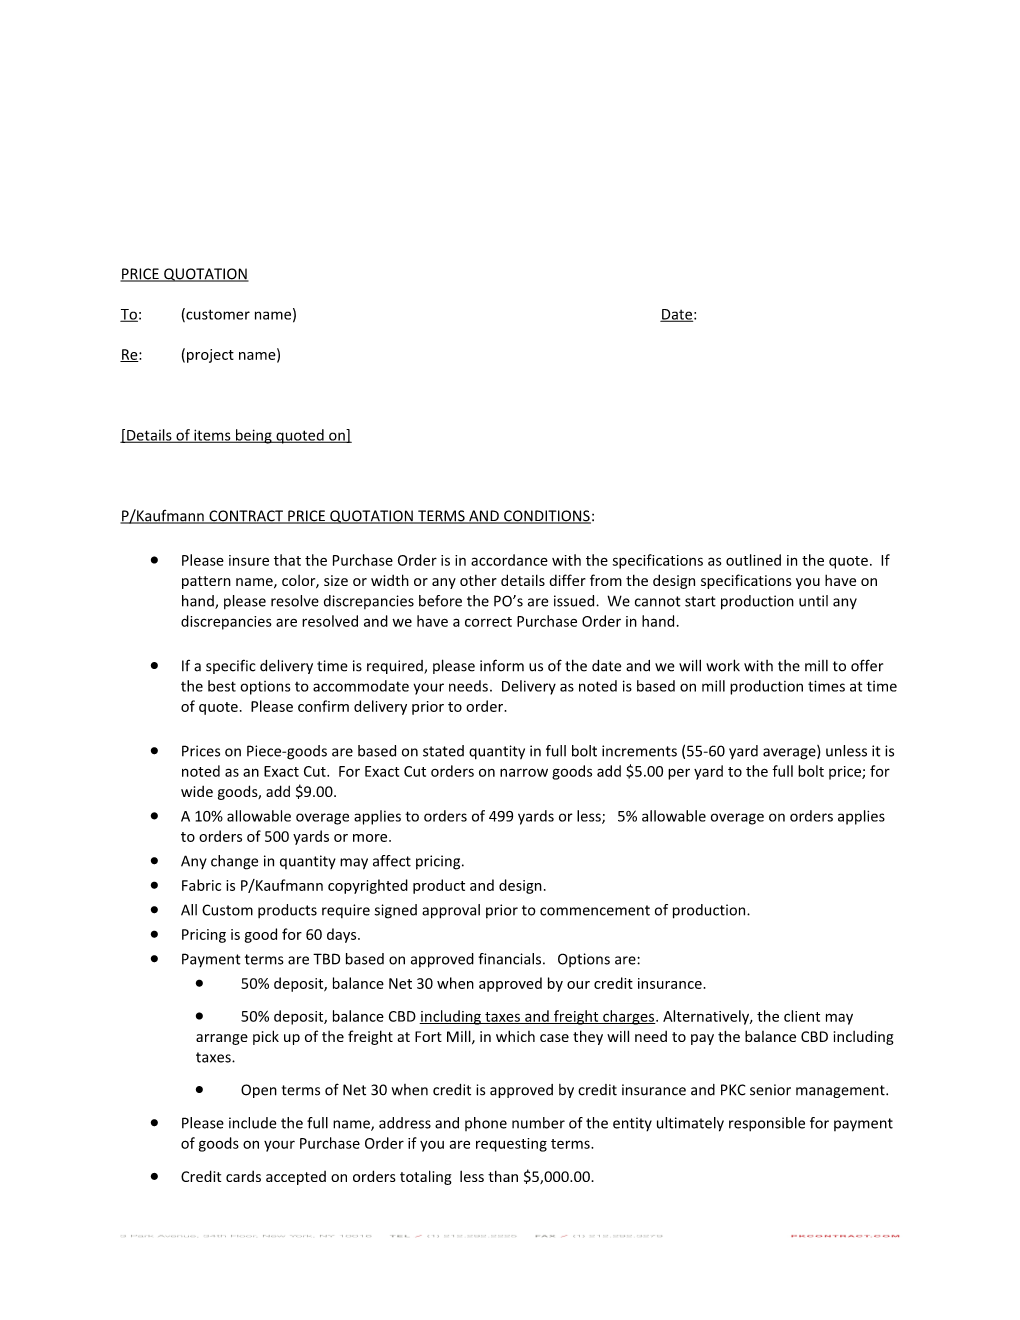 P/Kaufmann CONTRACT PRICE QUOTATION TERMS and CONDITIONS